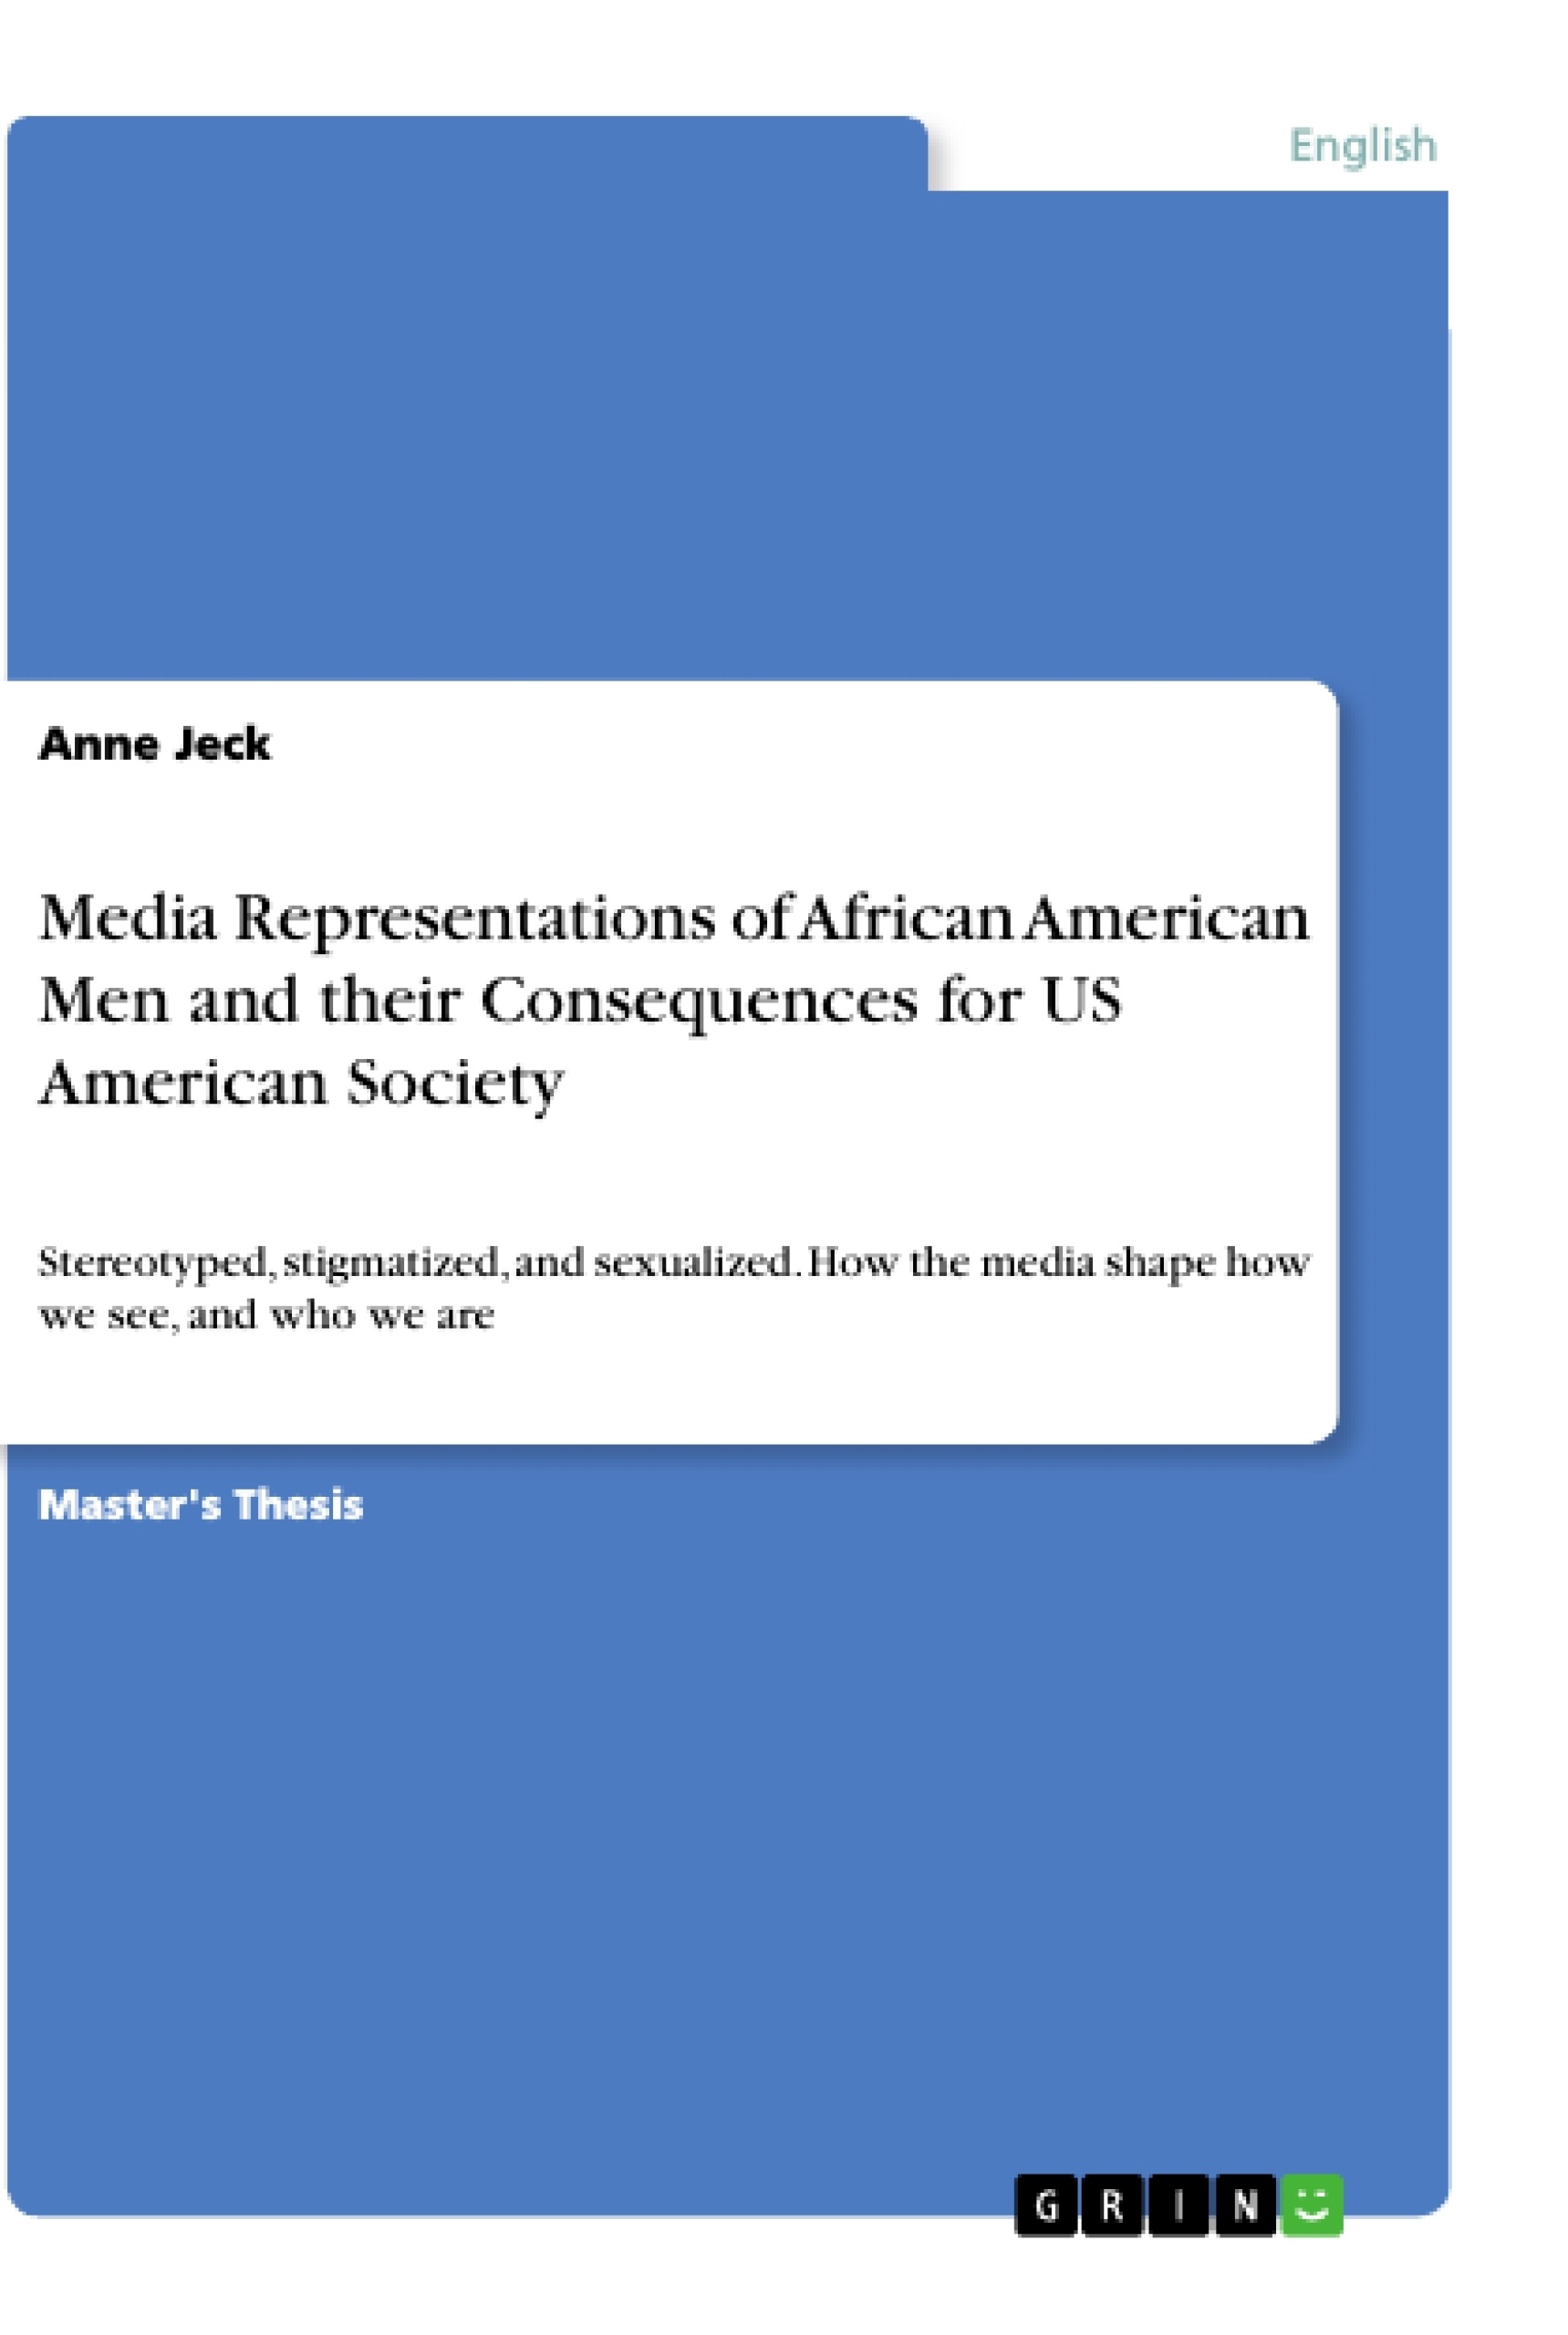 Title: Media Representations of African American Men and their Consequences for US American Society